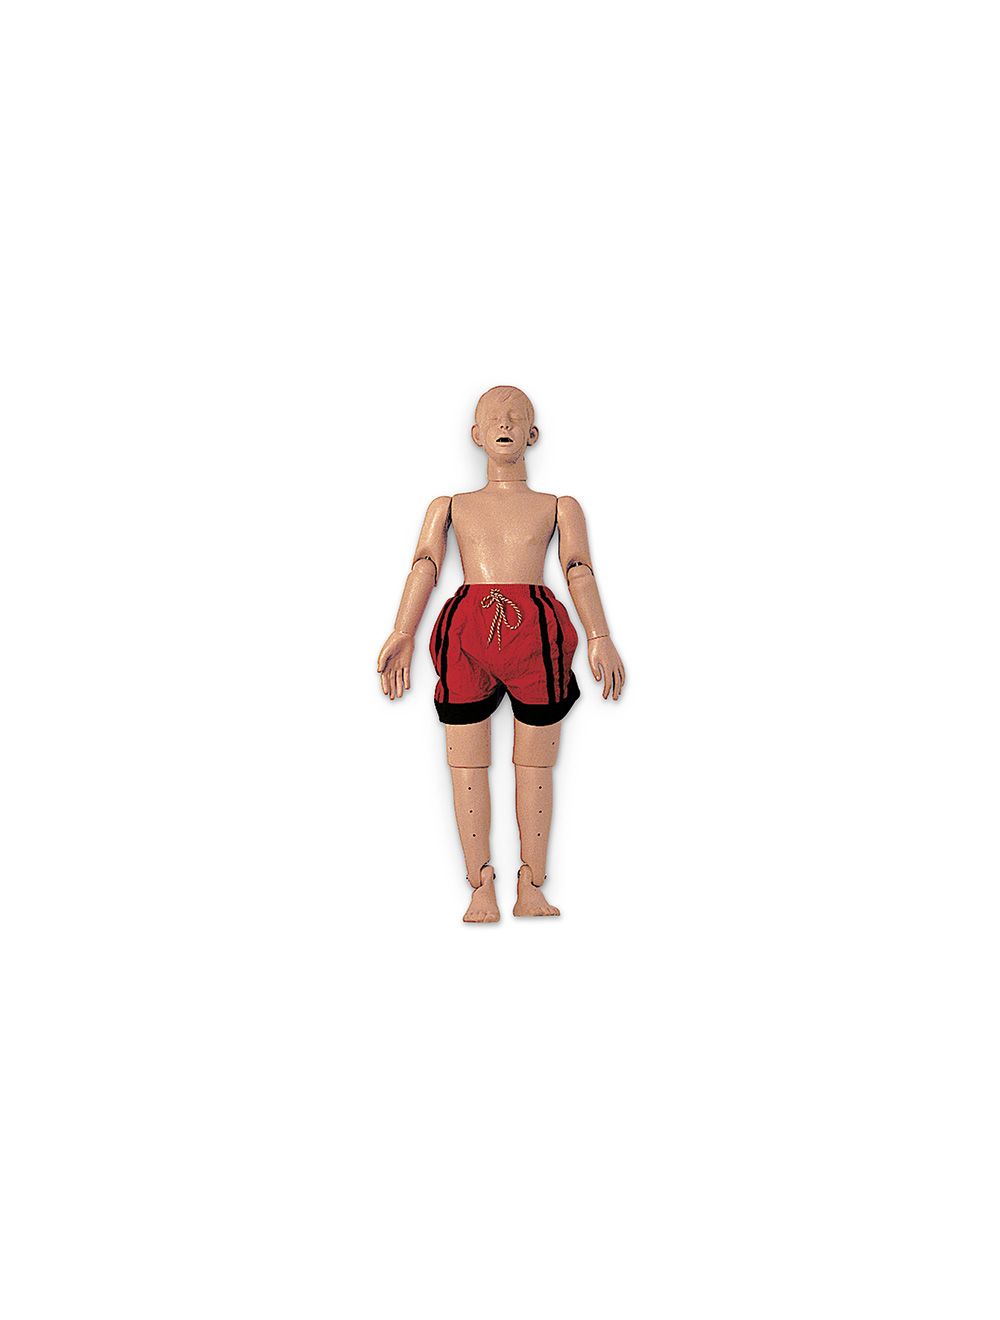 Adolescent model designed for water rescue and subsequent CPR